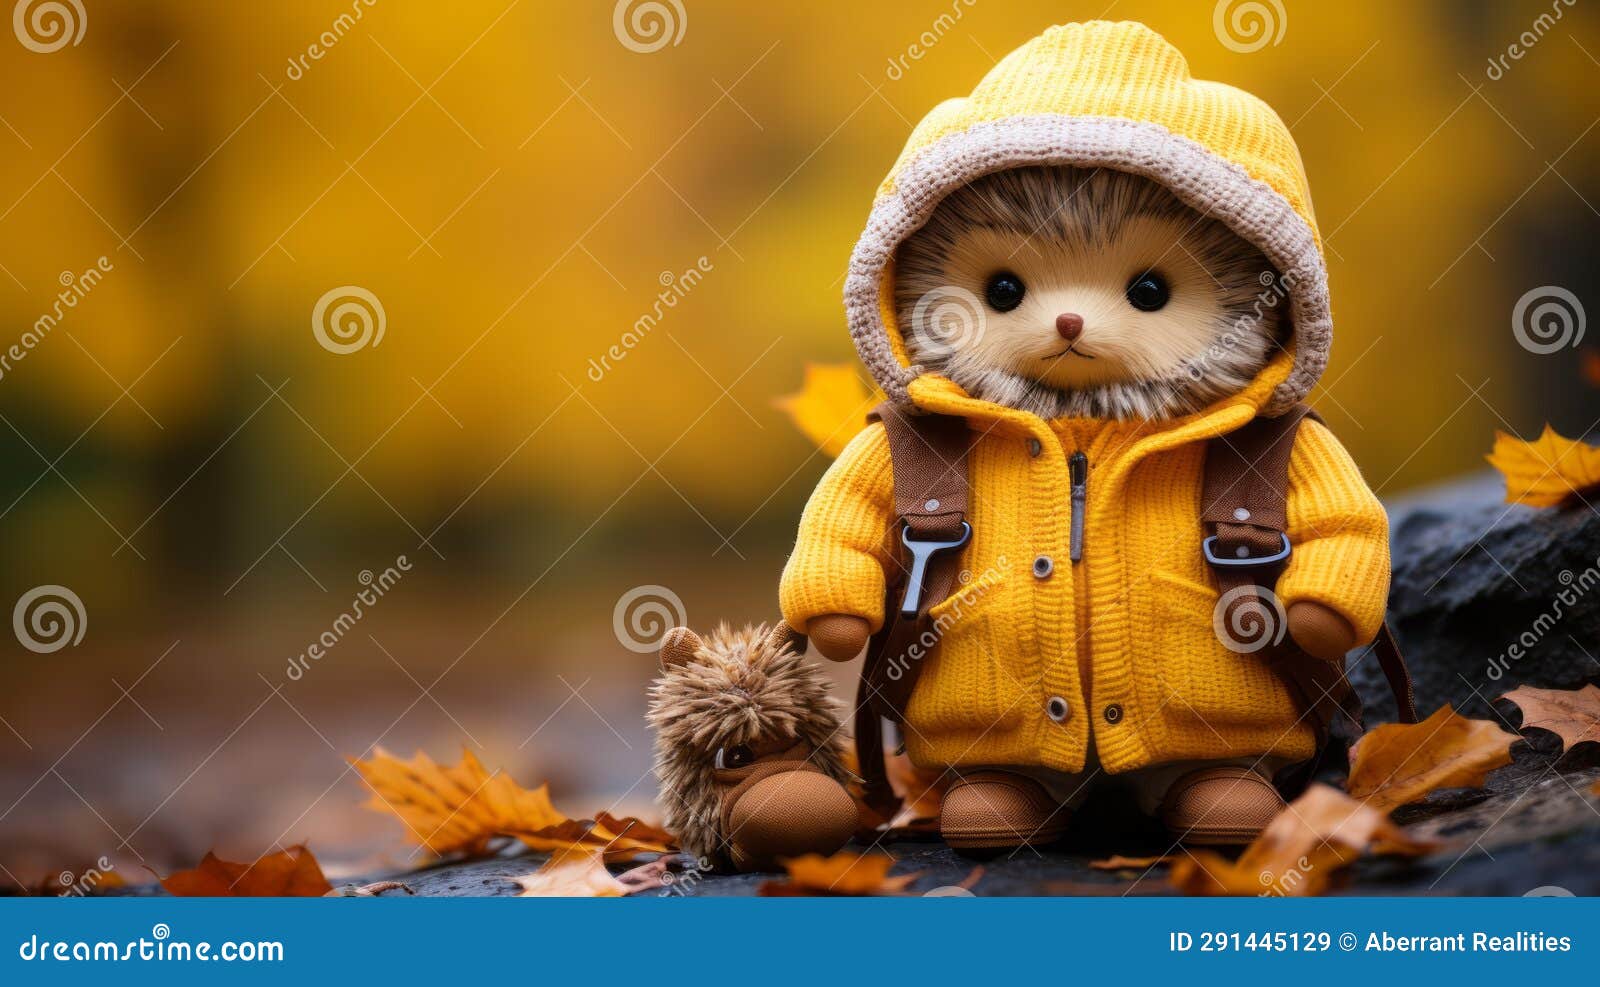 A Stuffed Animal Wearing a Yellow Jacket and Holding a Small Toy Stock ...